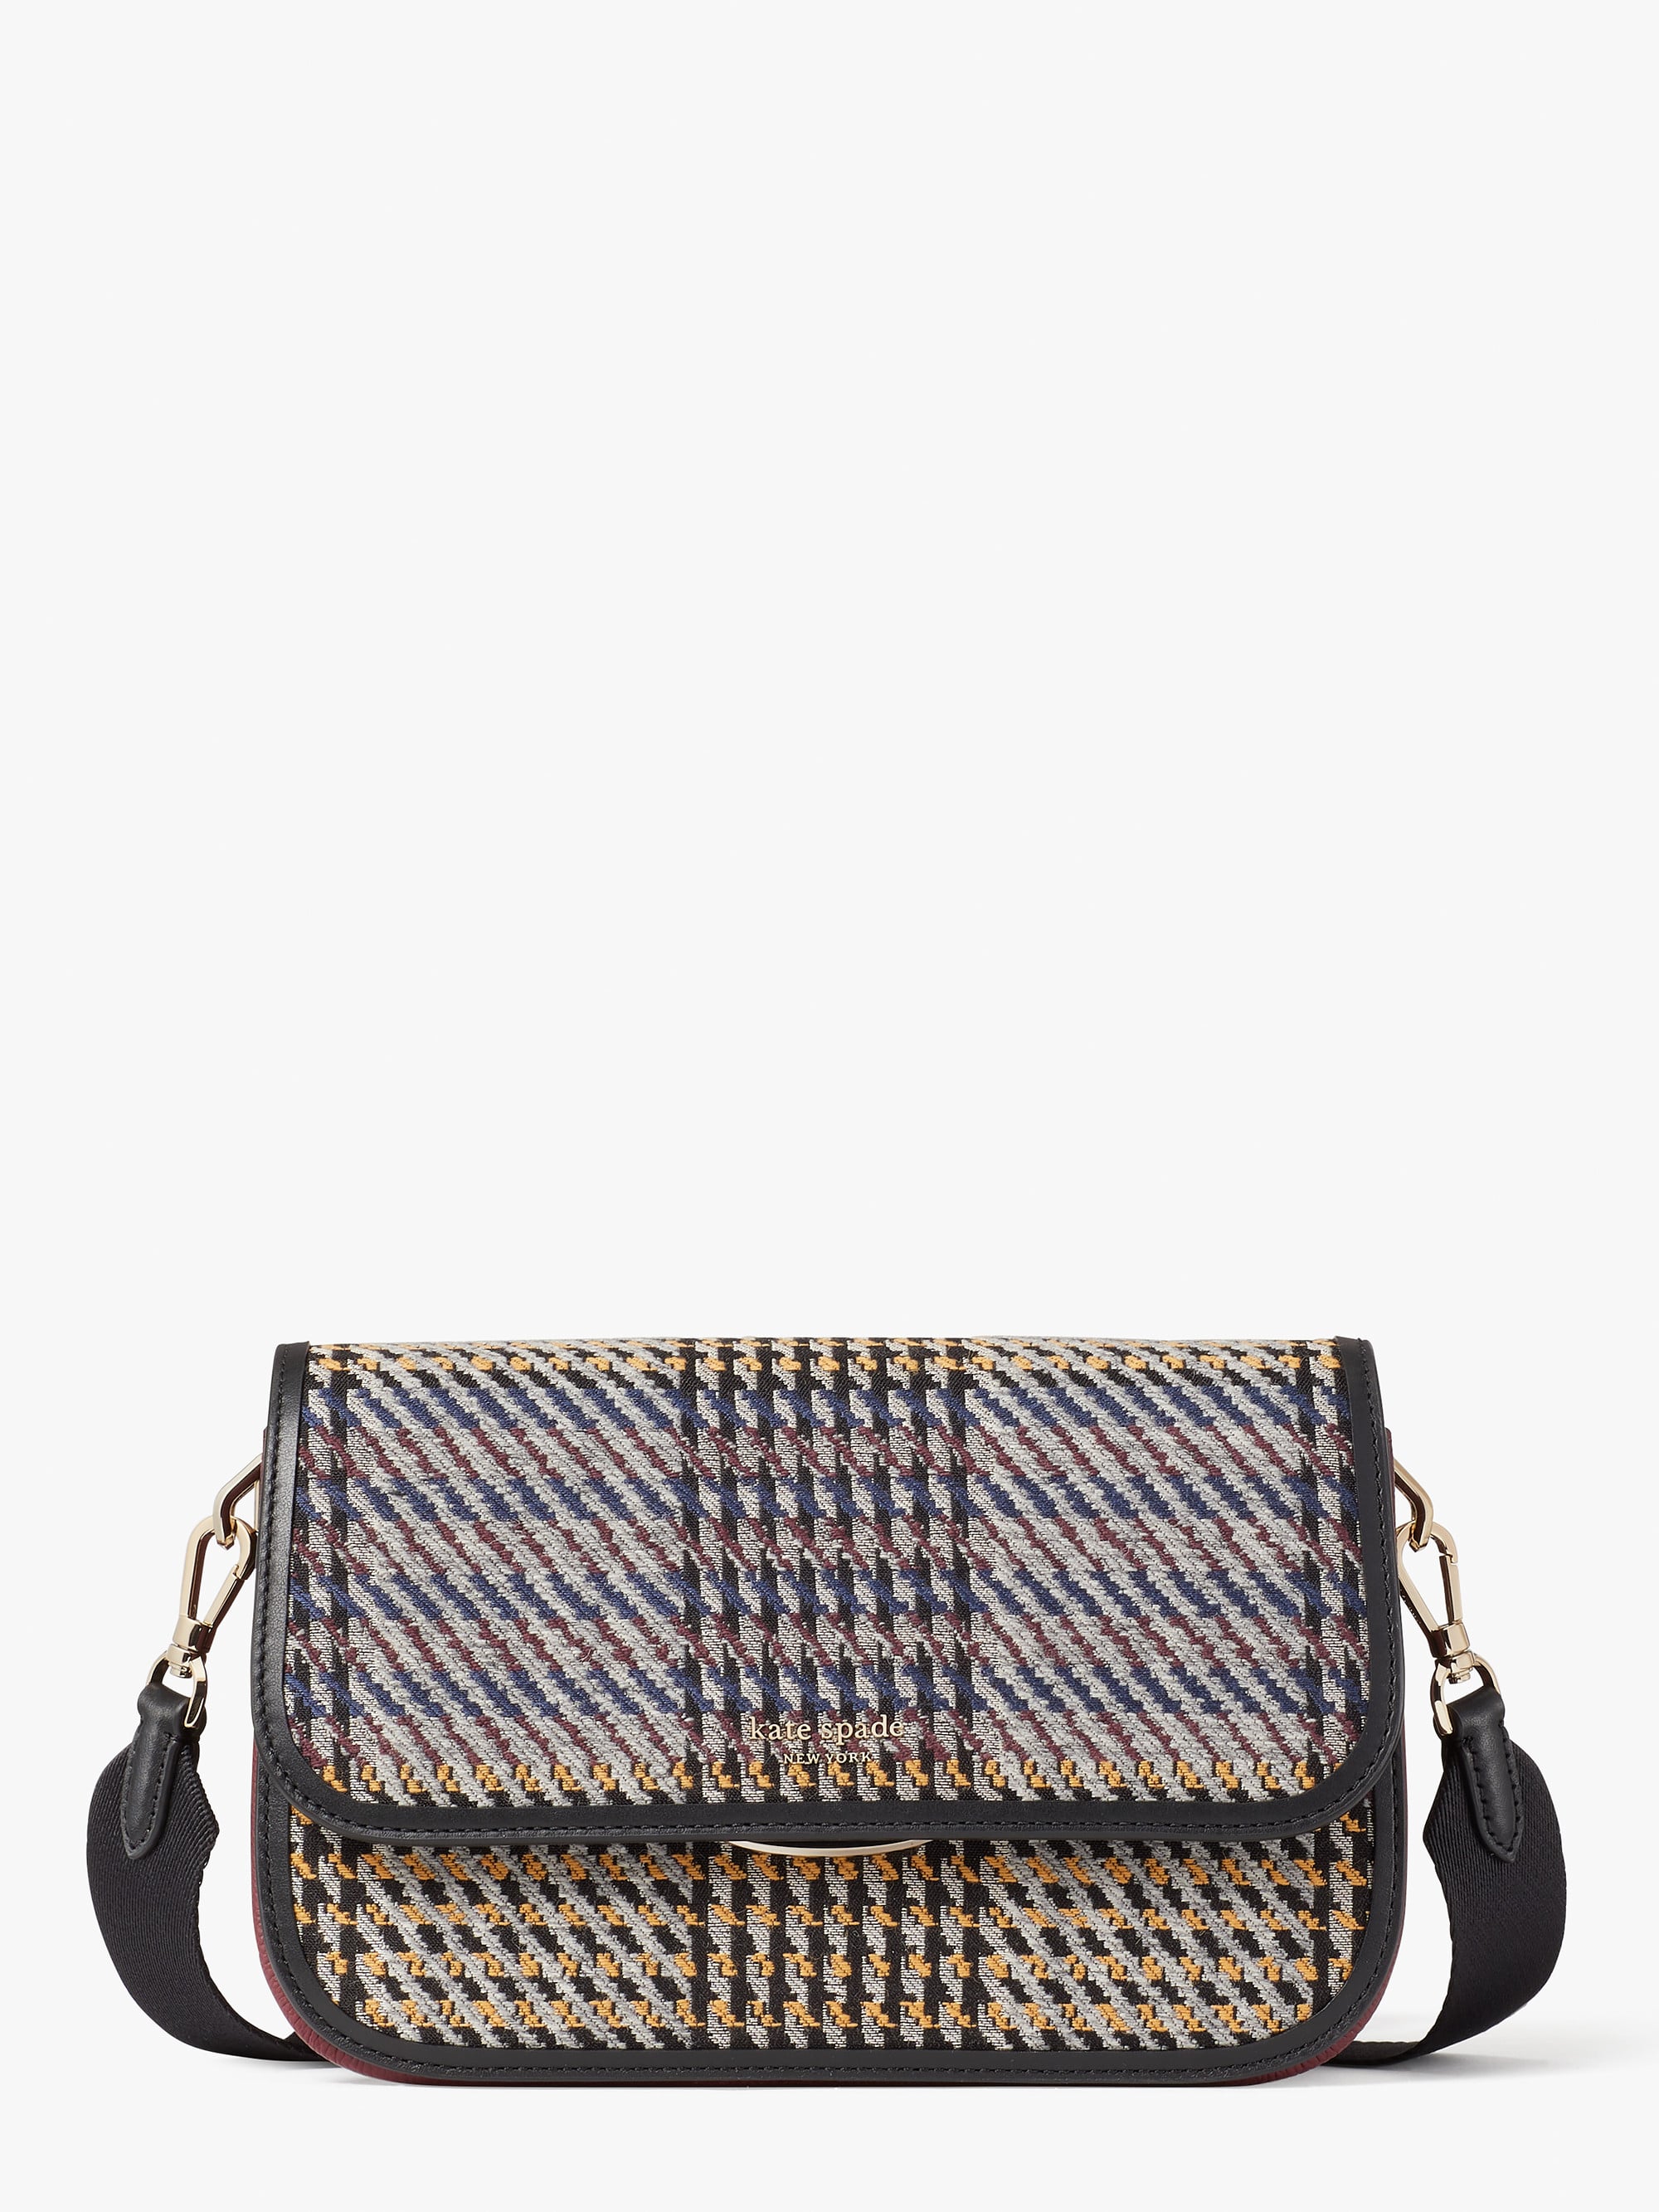 Found tge beautiful and biral Kate Spade Quilted Trunk bag. This colle